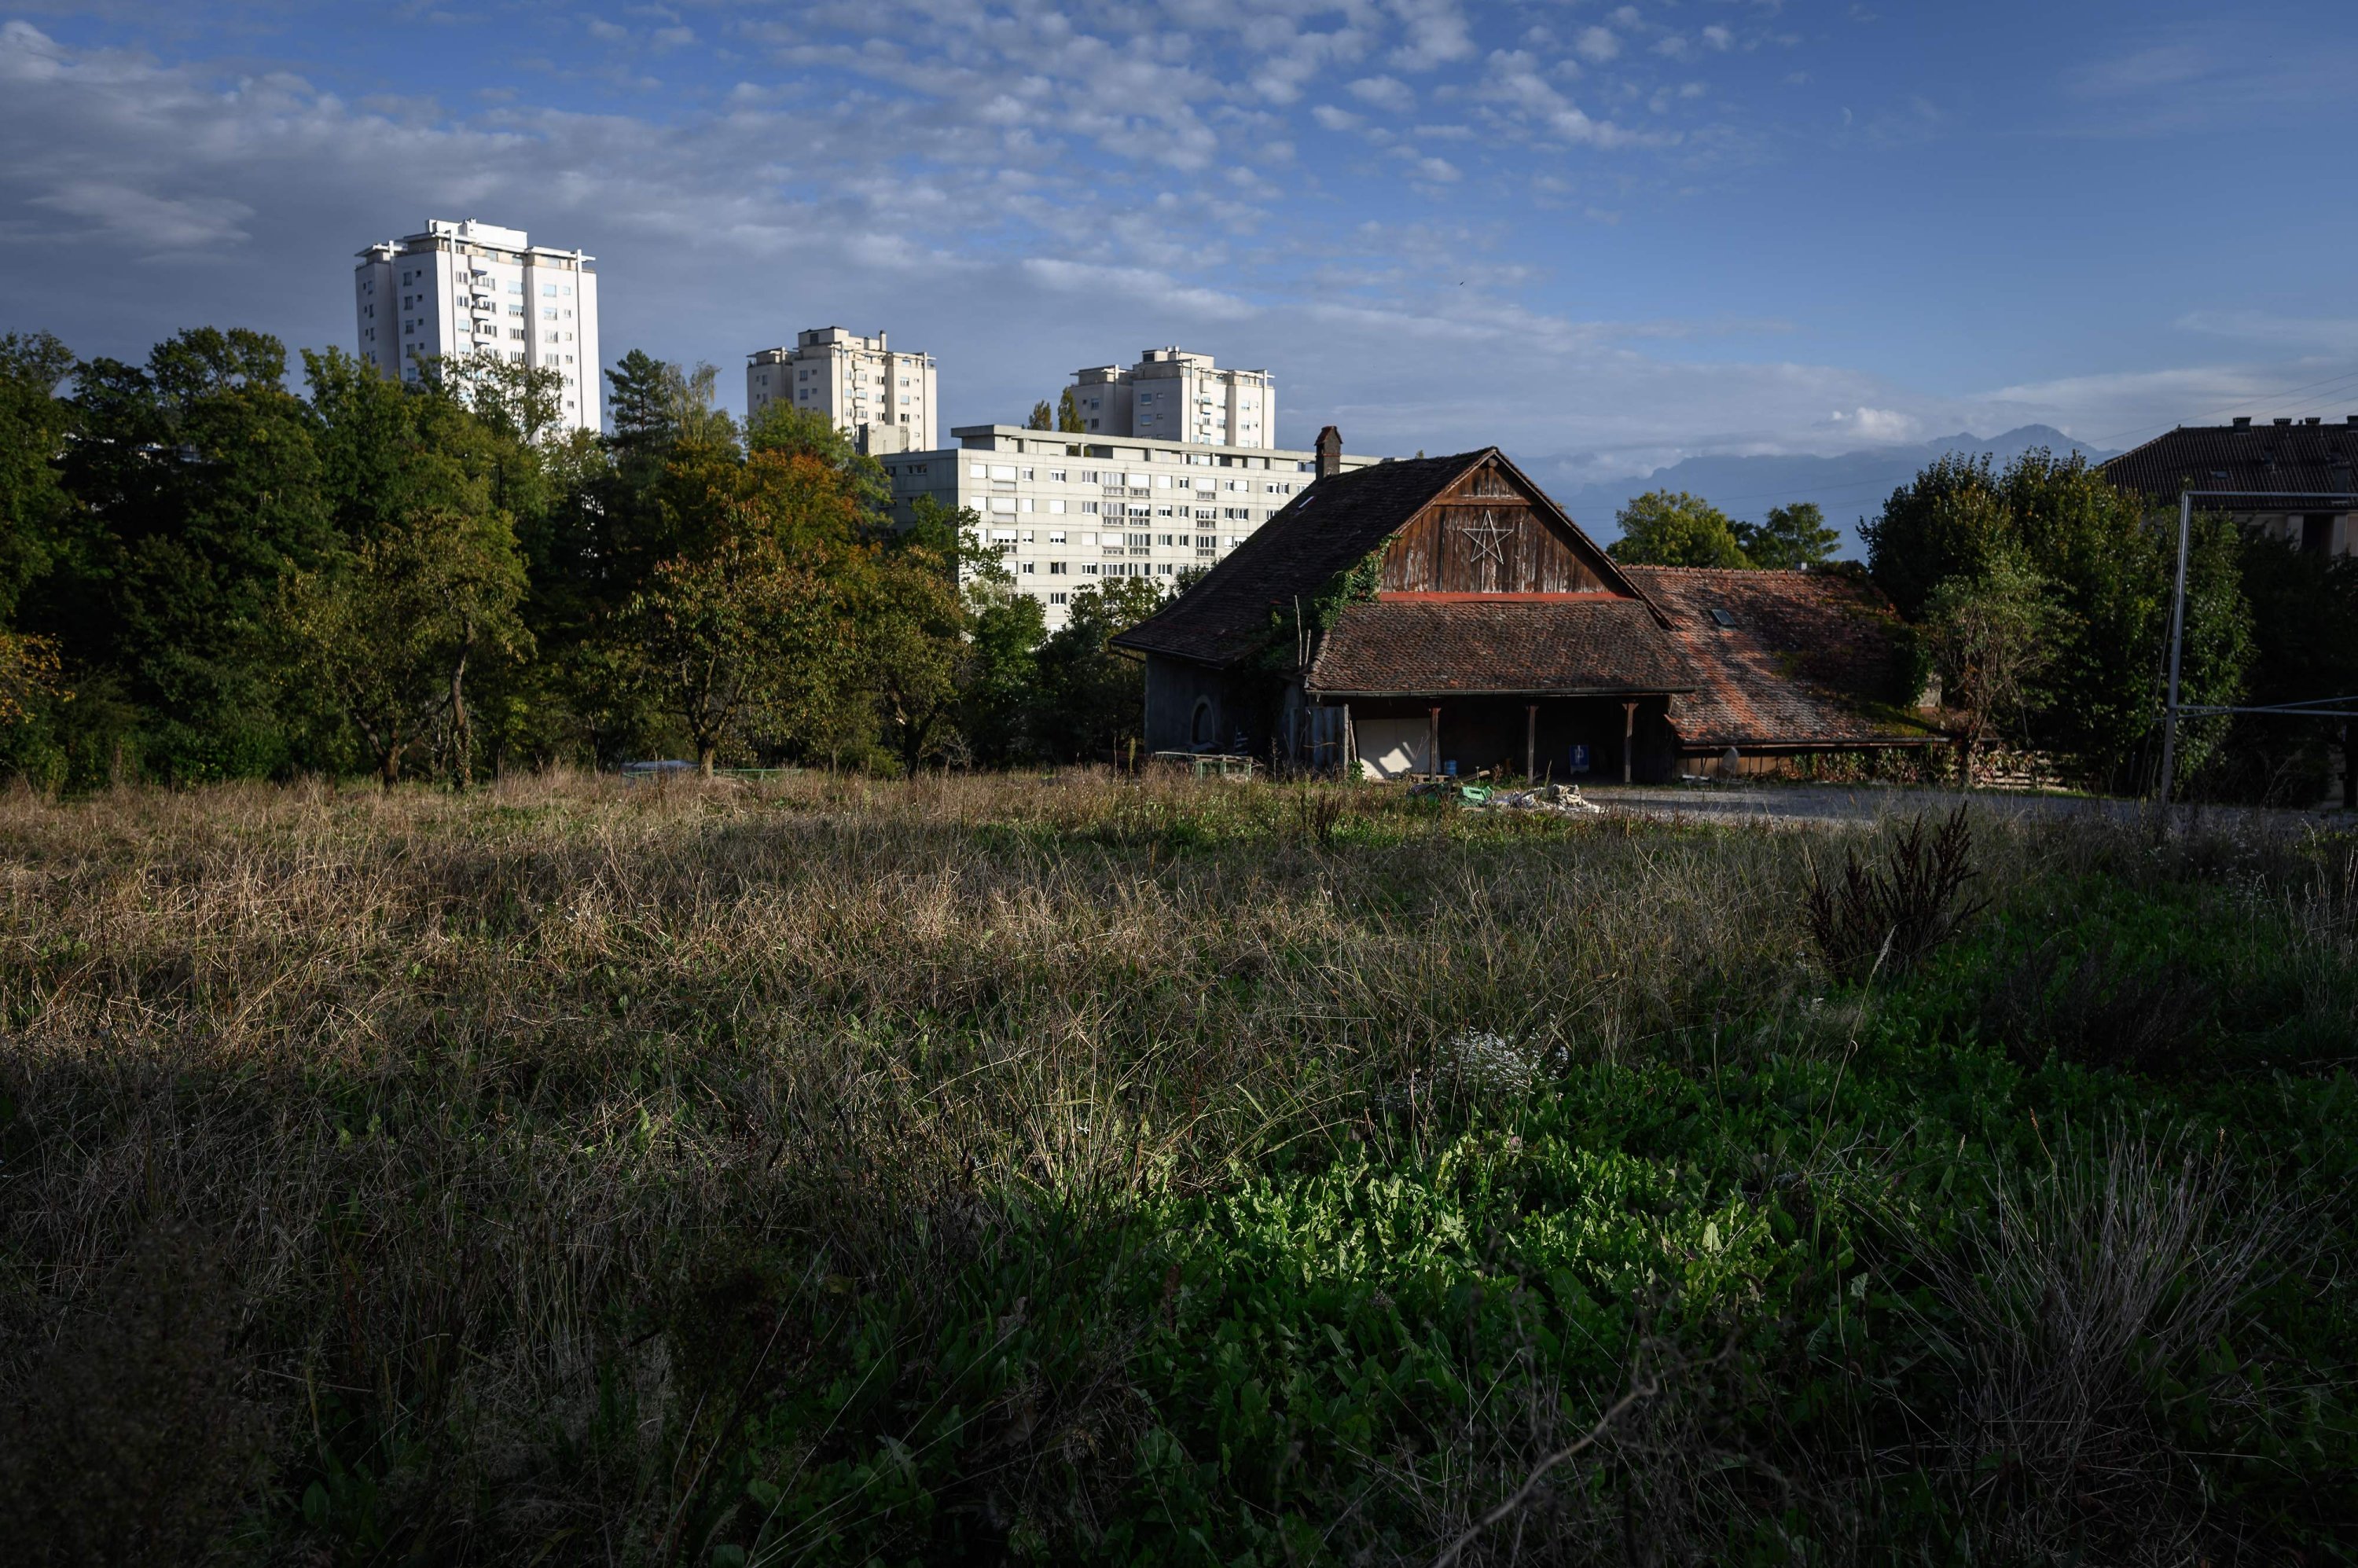 The former Aeby farm and its dioxin-polluted area once used as agricultural land in the center of Lausanne, Switzerland, Oct. 12, 2021. (AFP Photo)